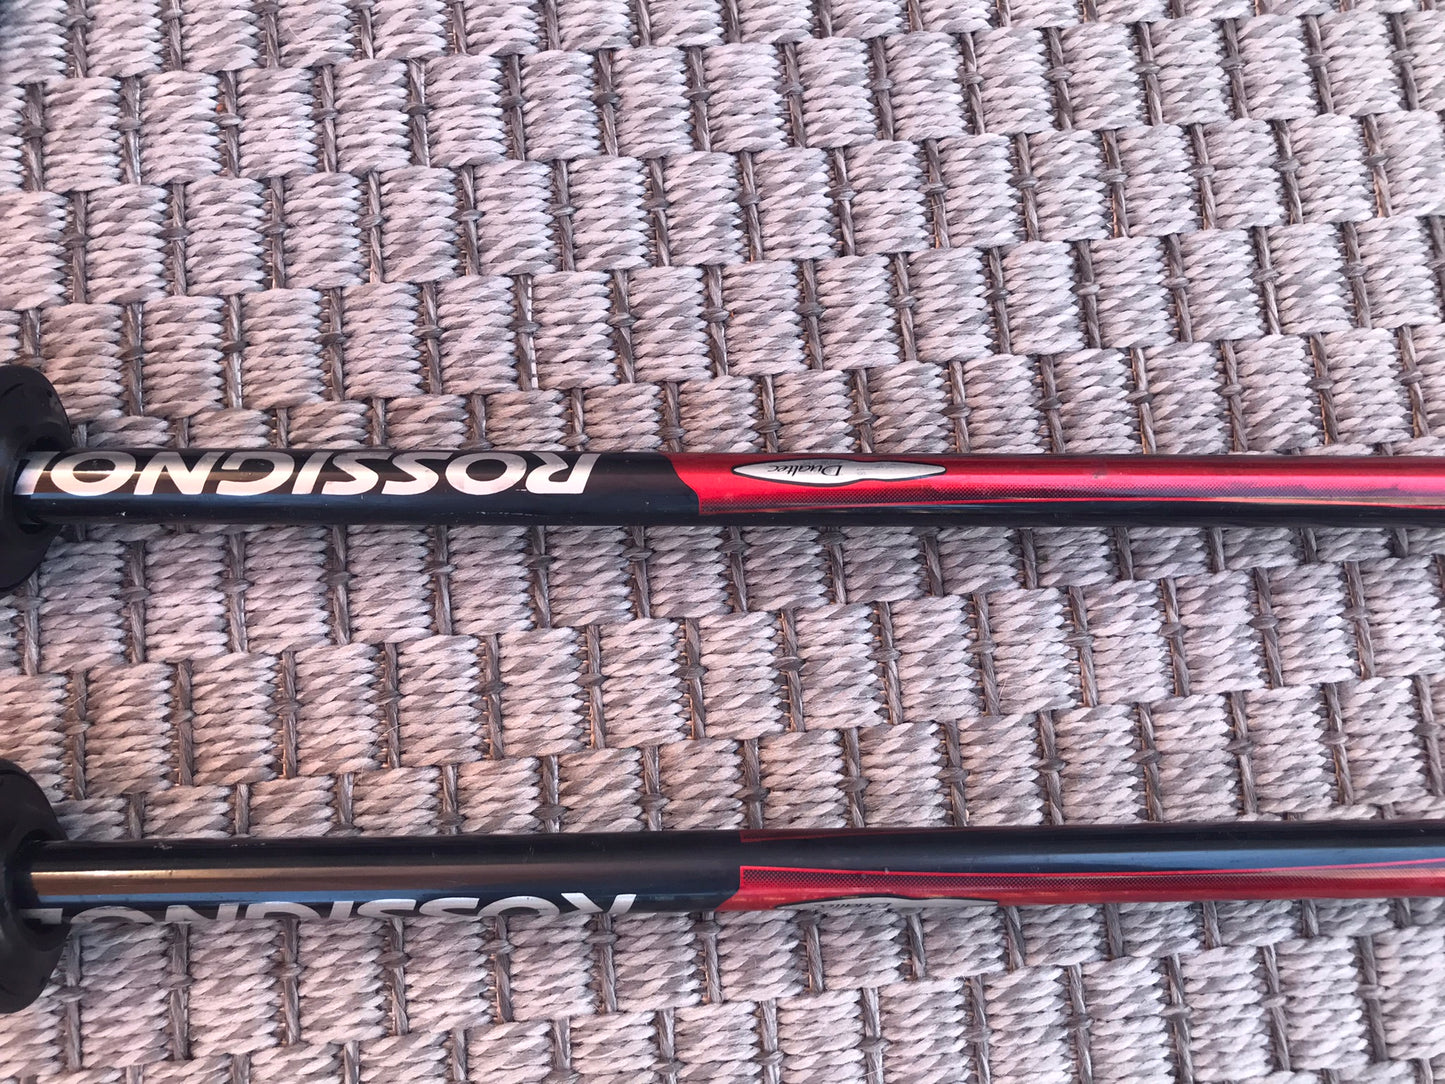 Ski Poles Adult Size 48 inch 120 cm Rossignol Black Red With Rubber Handles Excellent